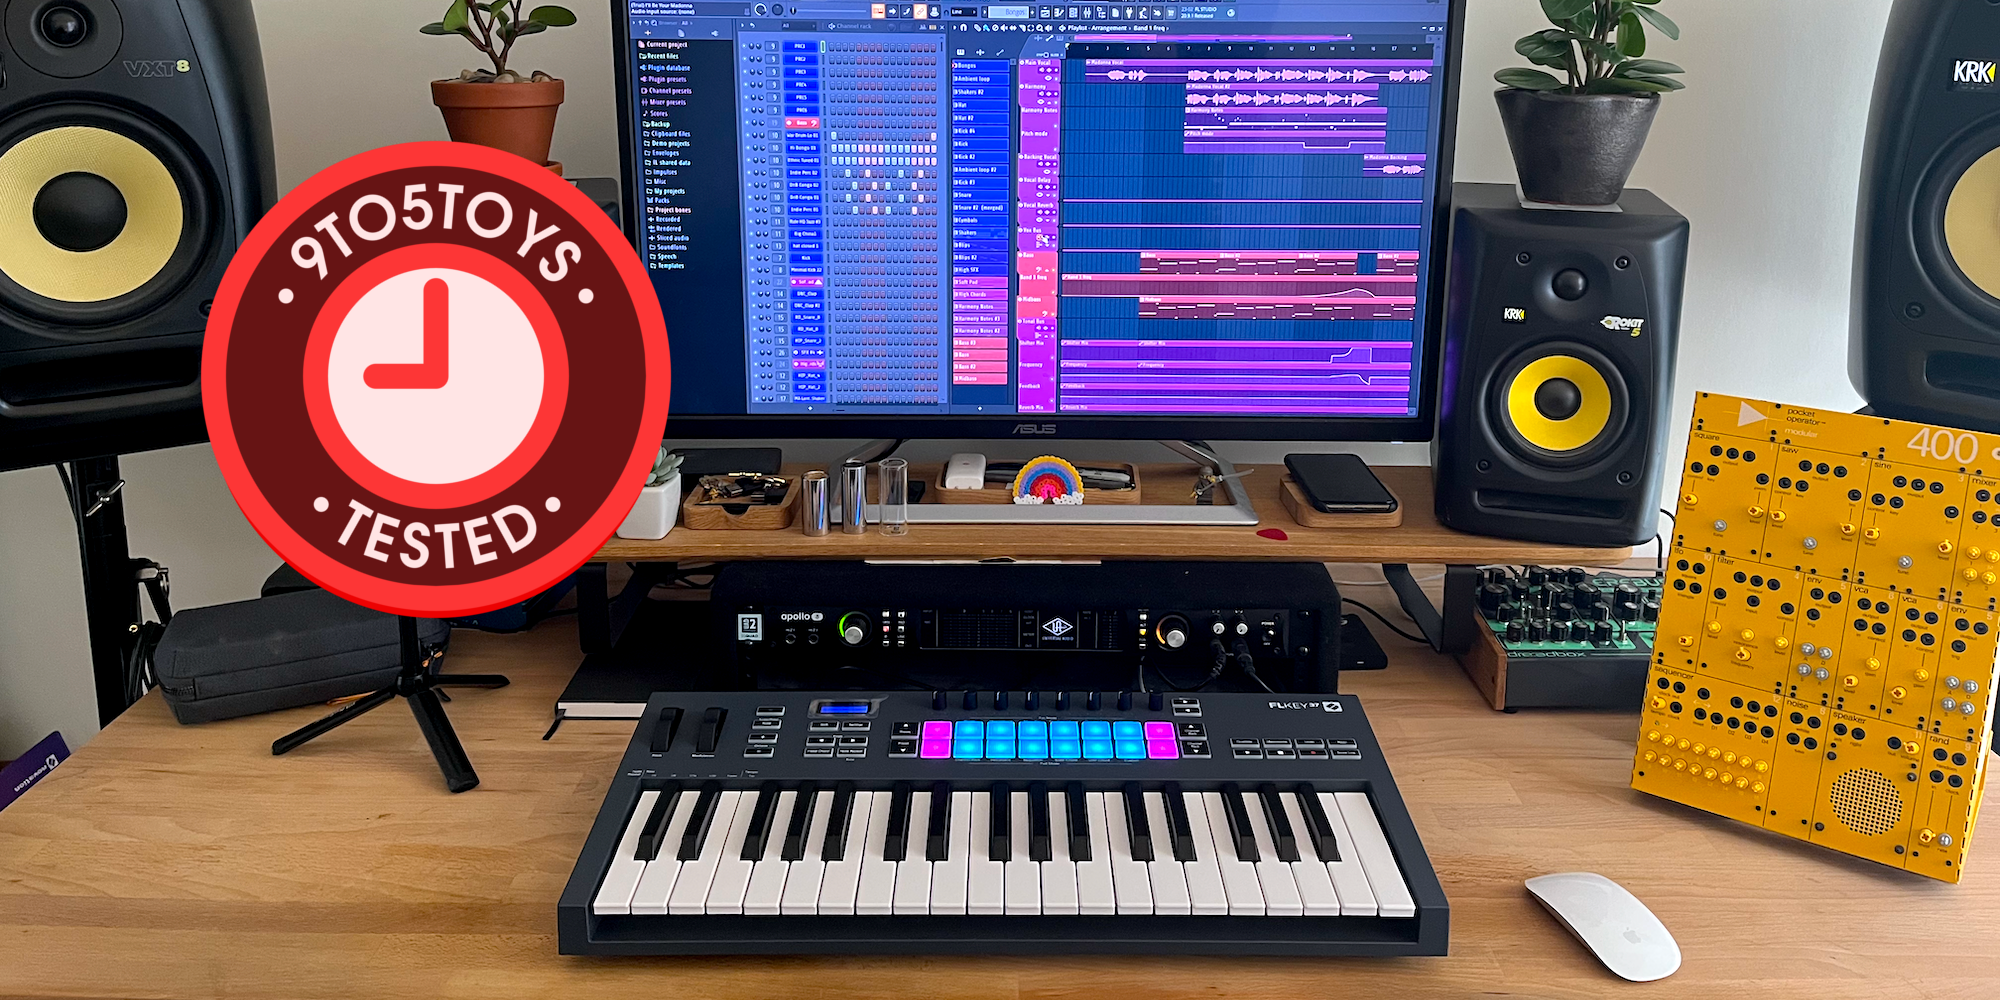 Hands-on with Novation's new FL Studio keyboard controller - 9to5Toys